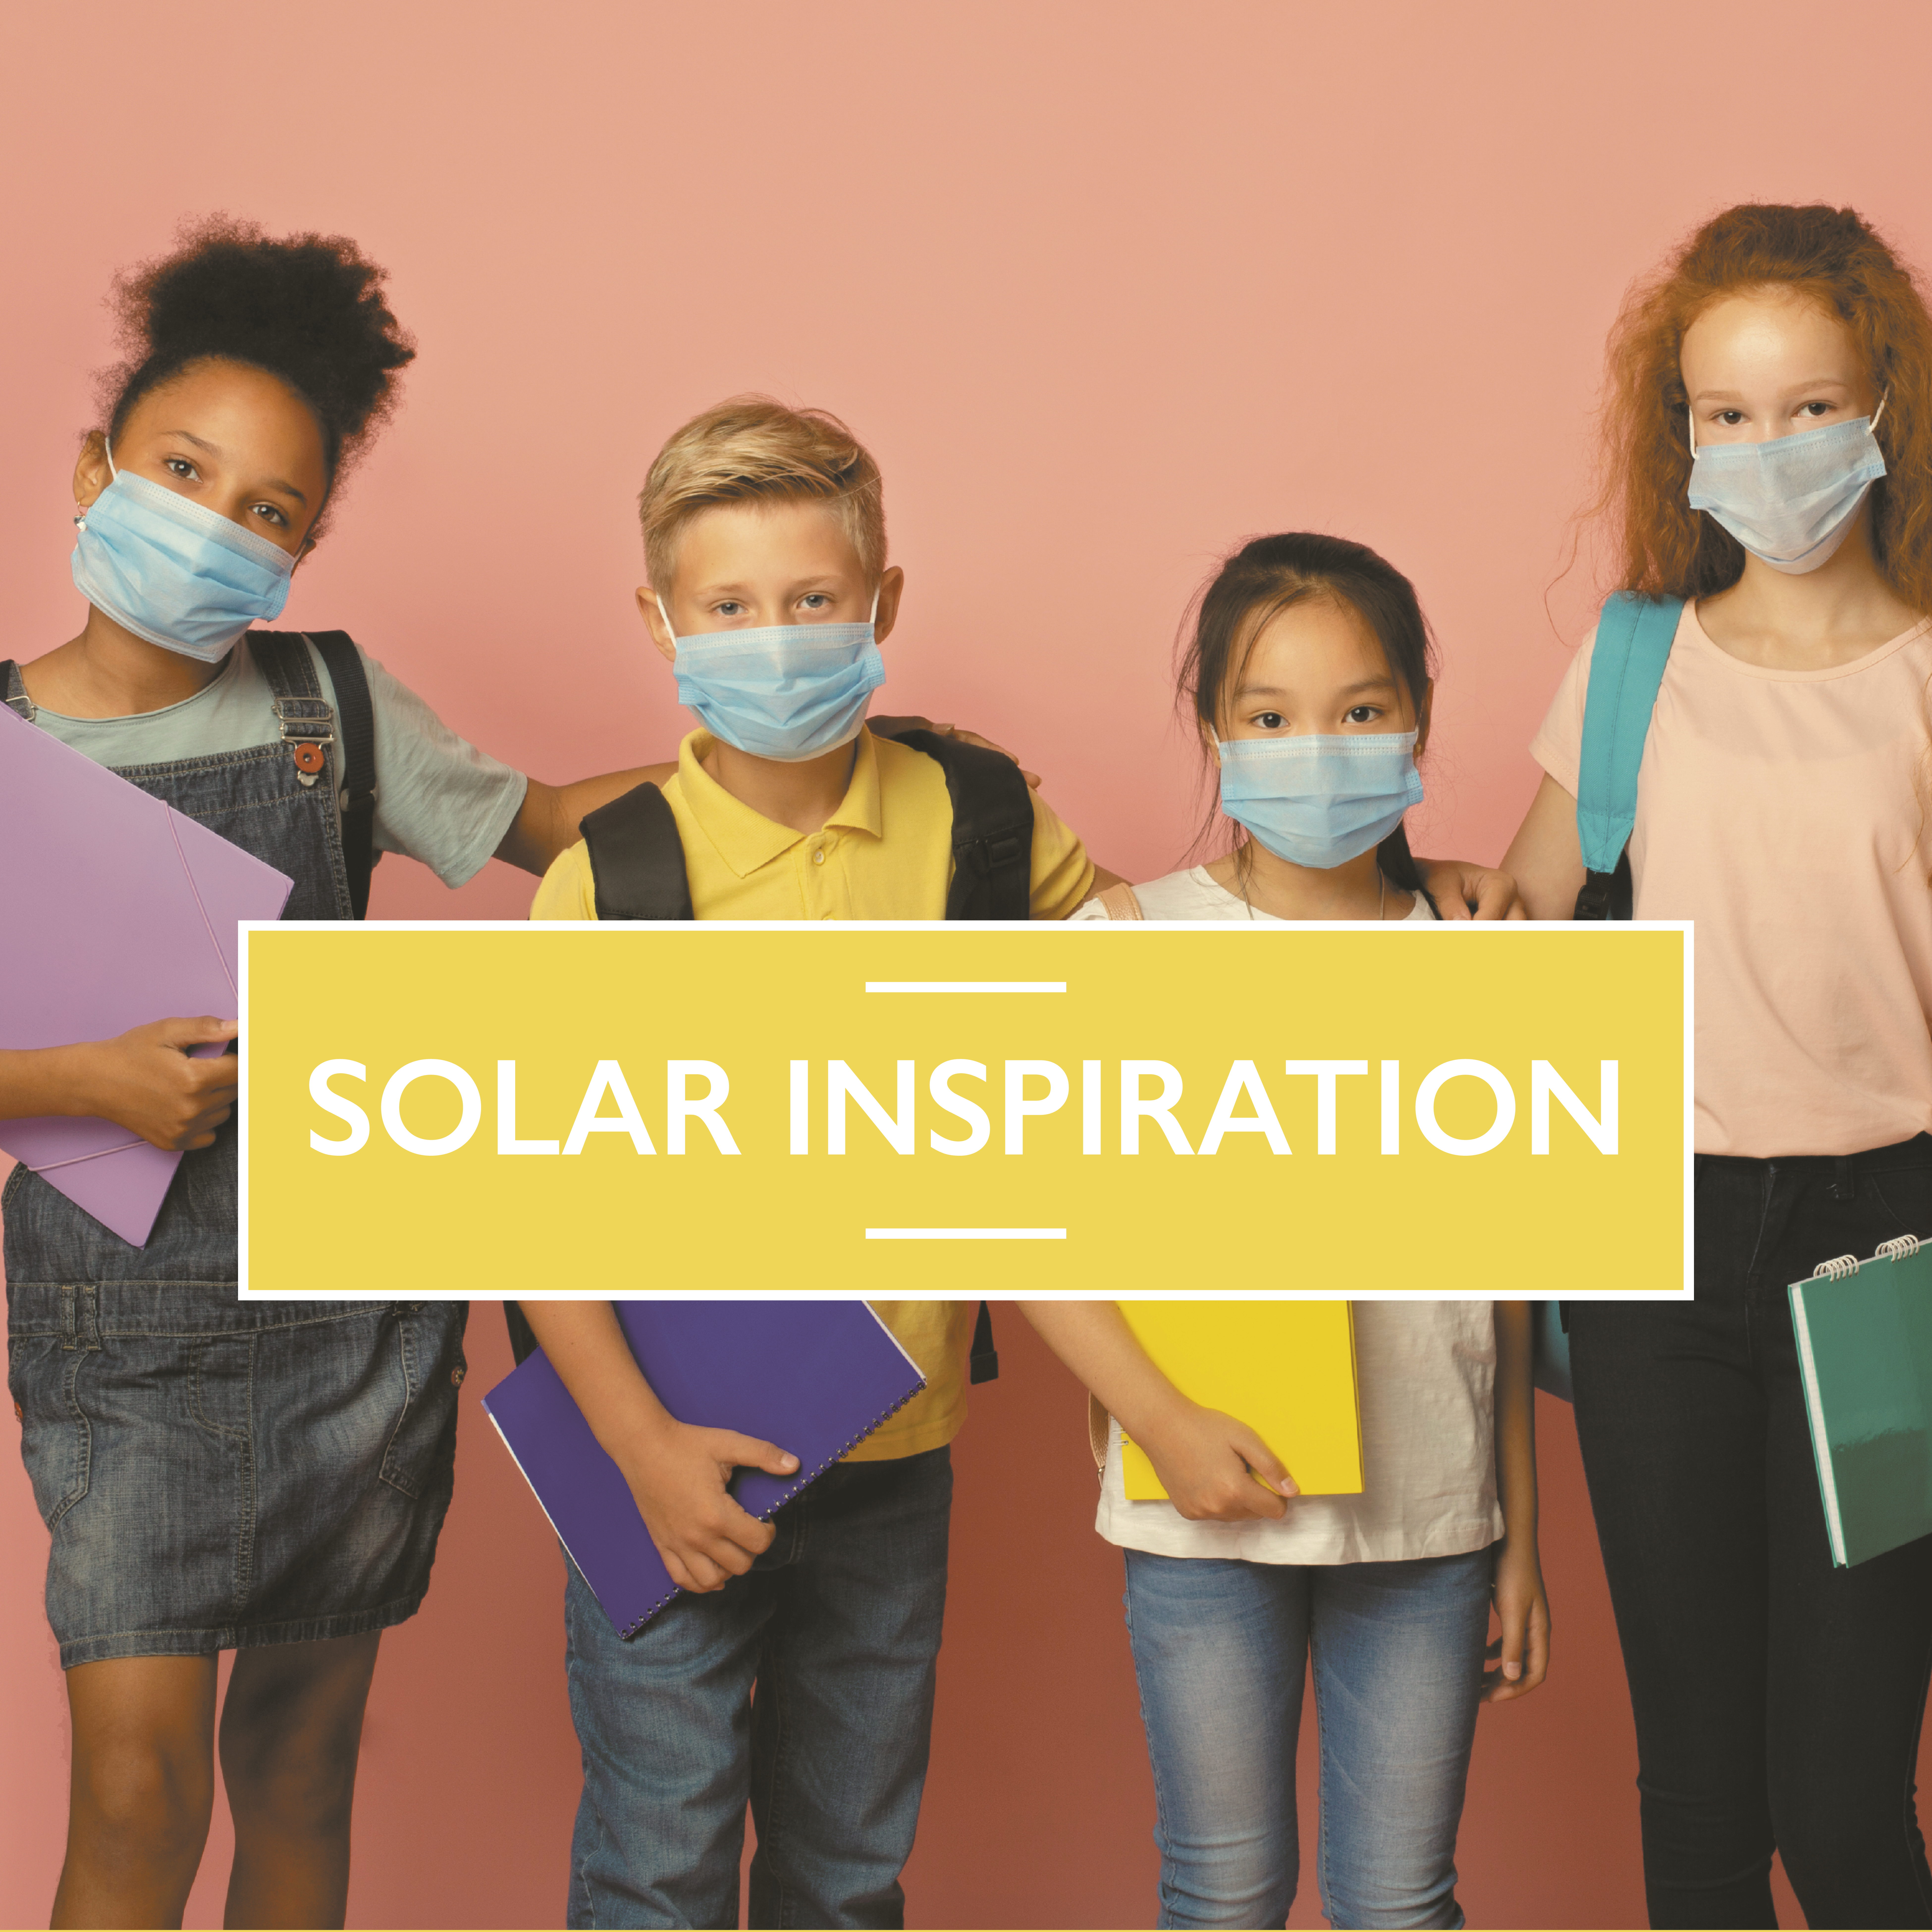 Solar inspiration with kids in school settings